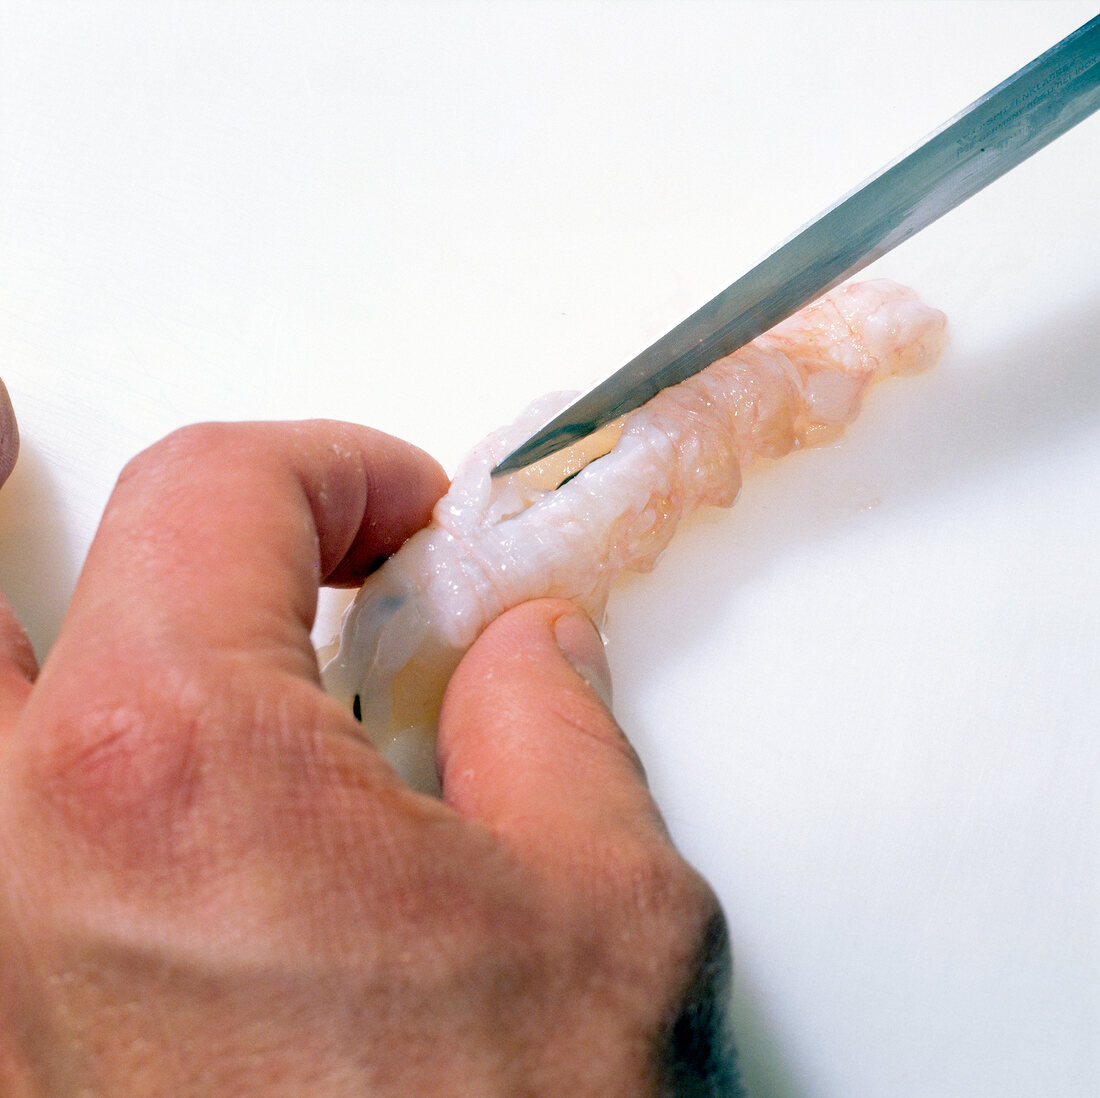 Close-up of hand cutting shrimp from back to expose intestines, step 6